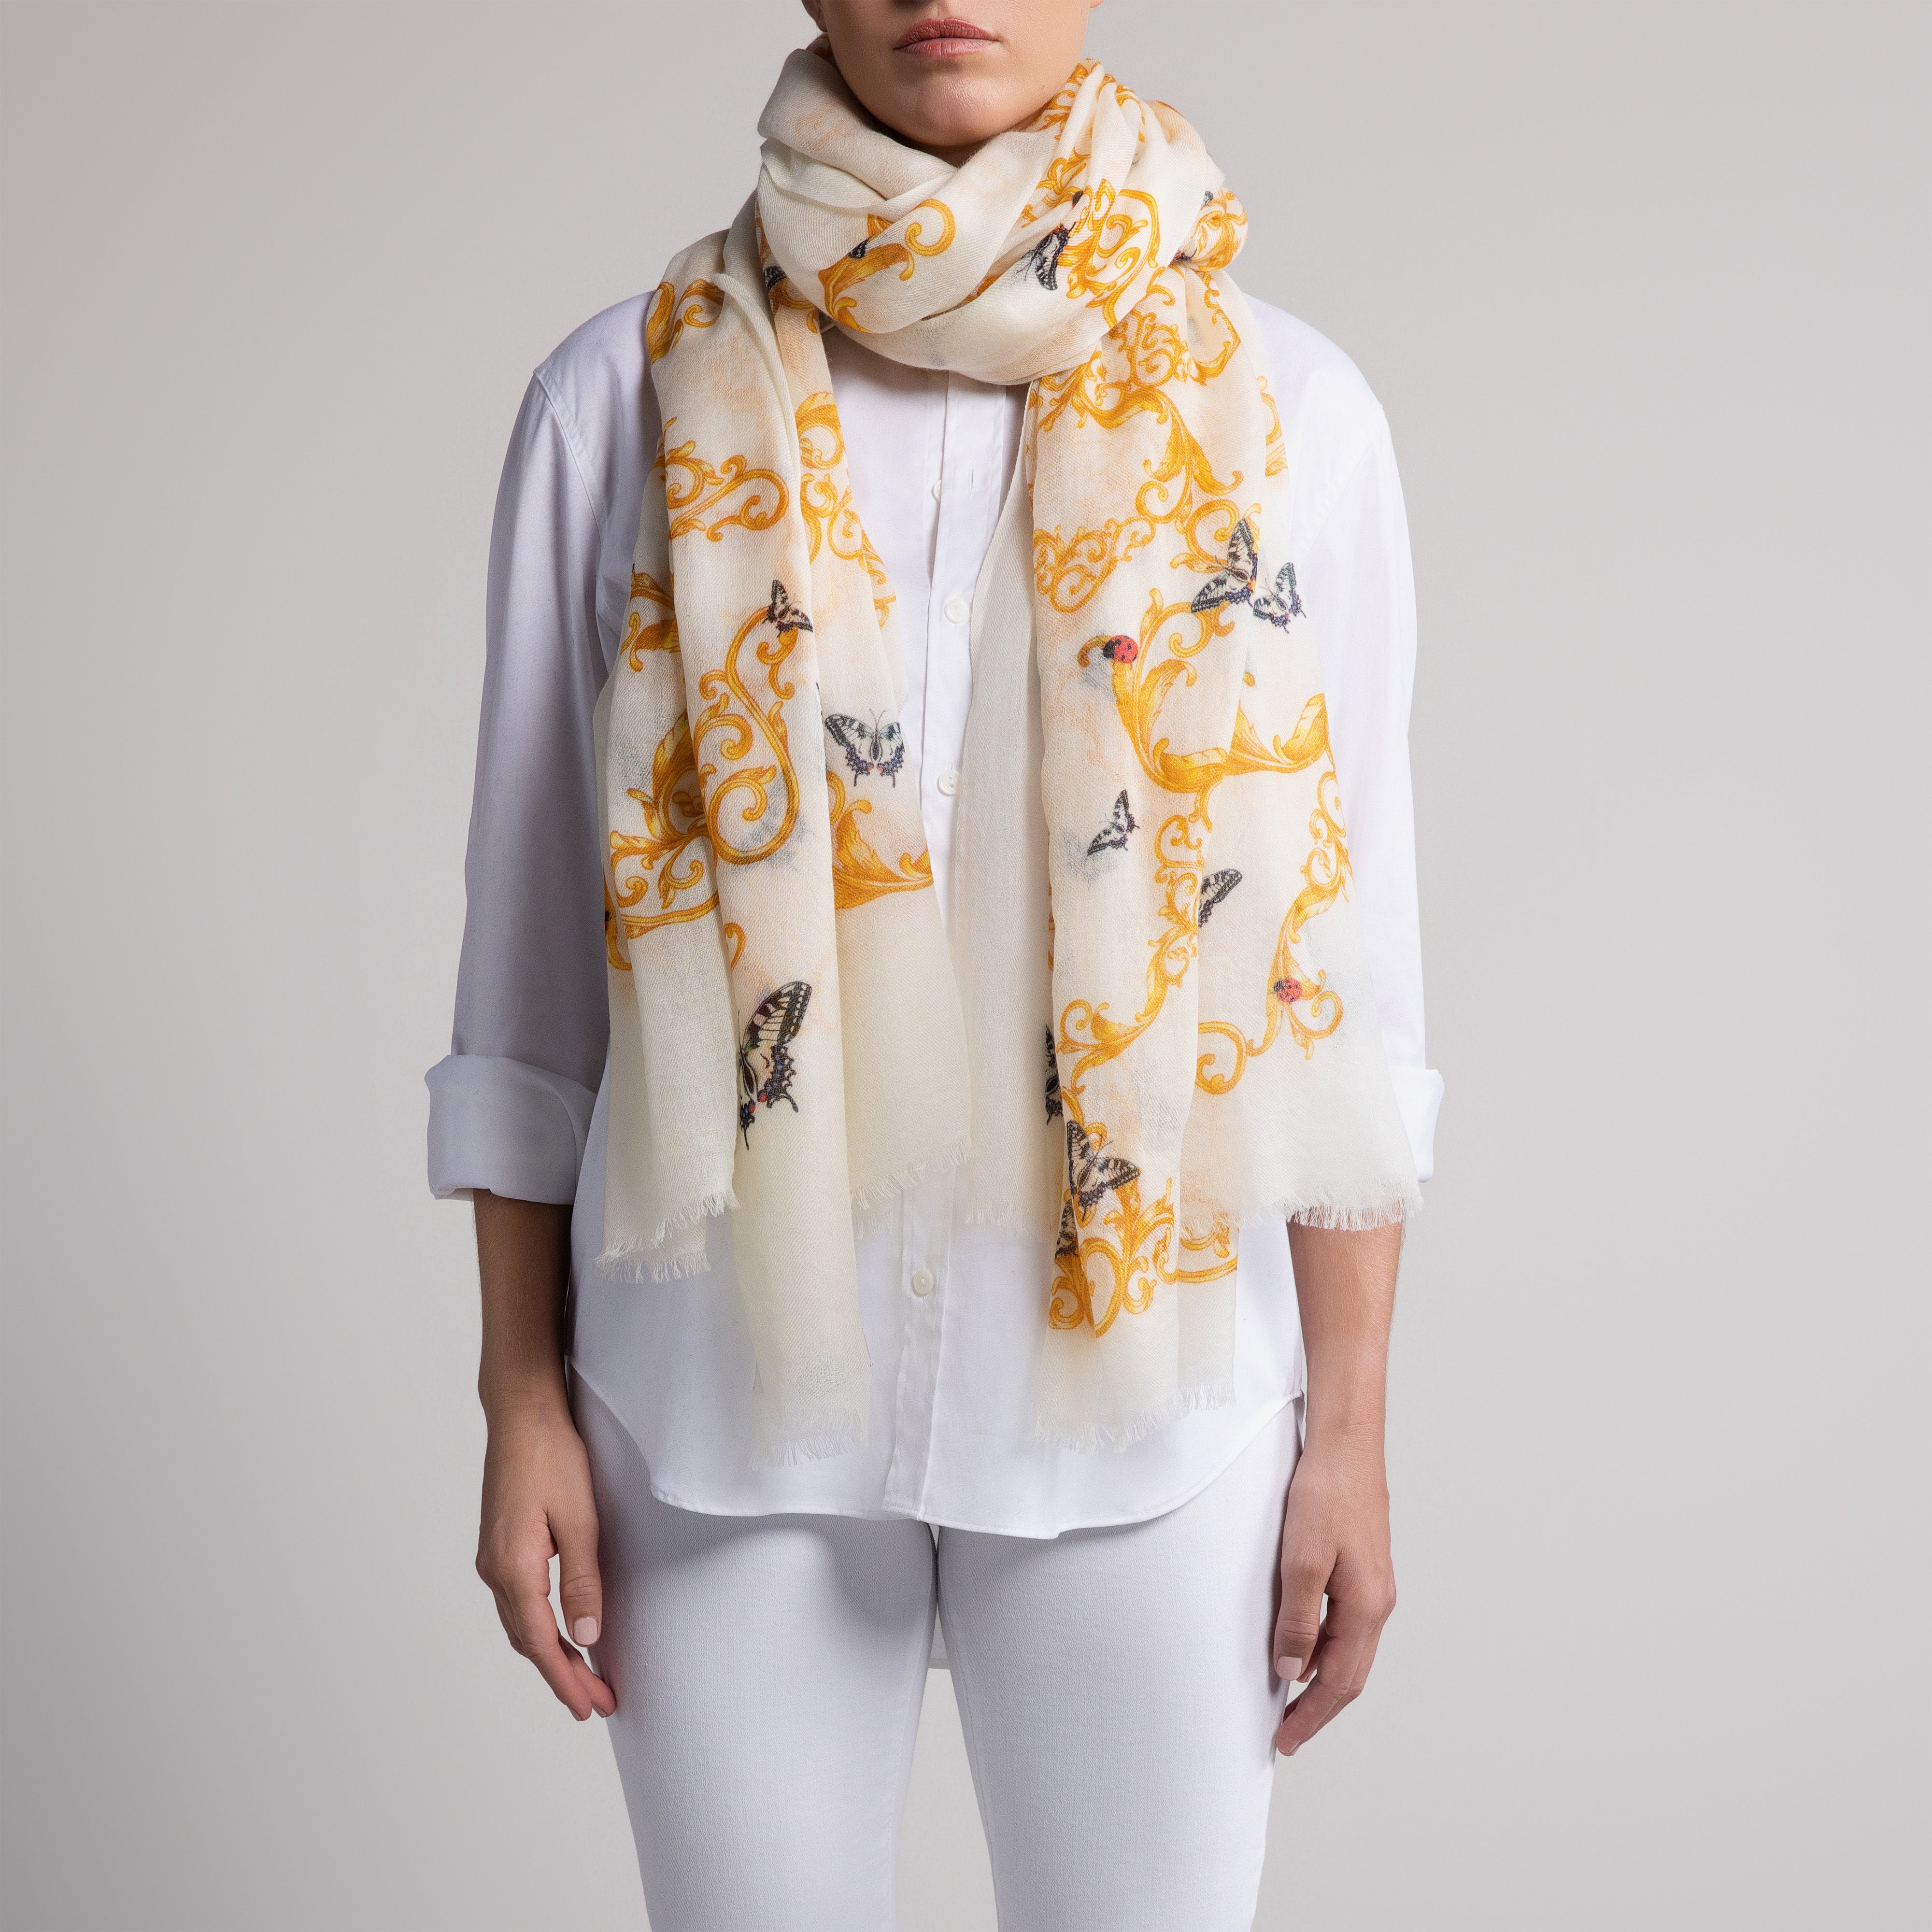 Butterfly & Baroque  100% Cashmere Scarf in Cream